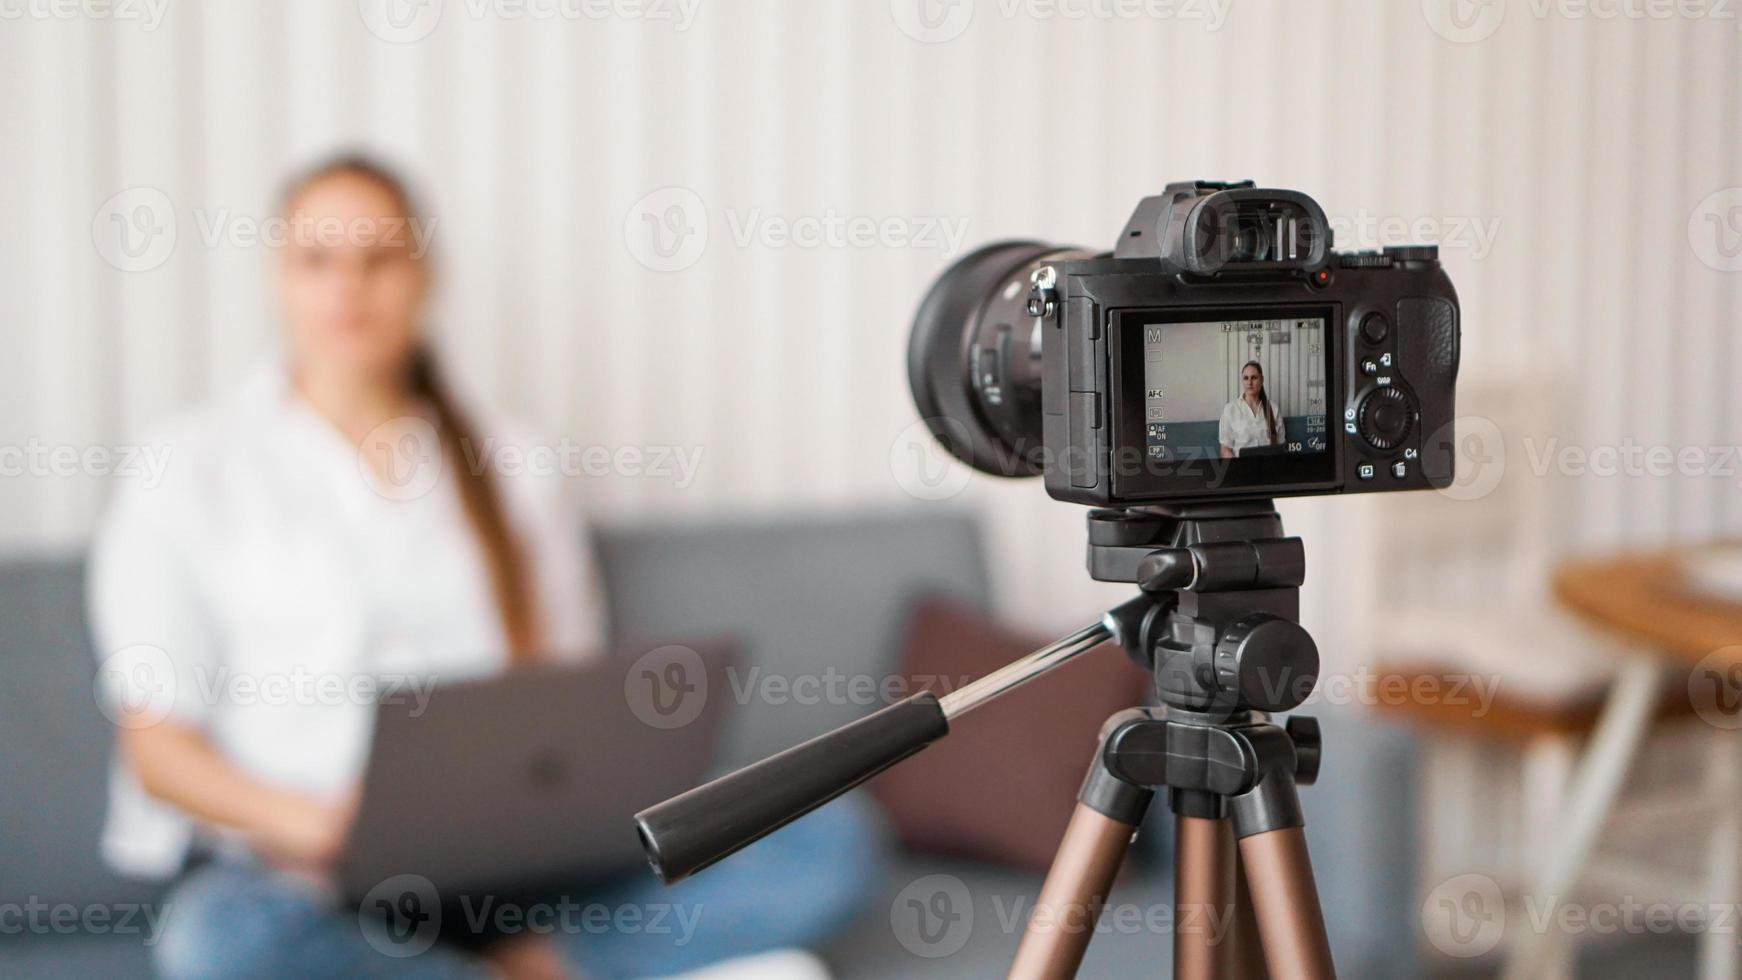 Blogger recording video indoors, selective focus on camera display photo